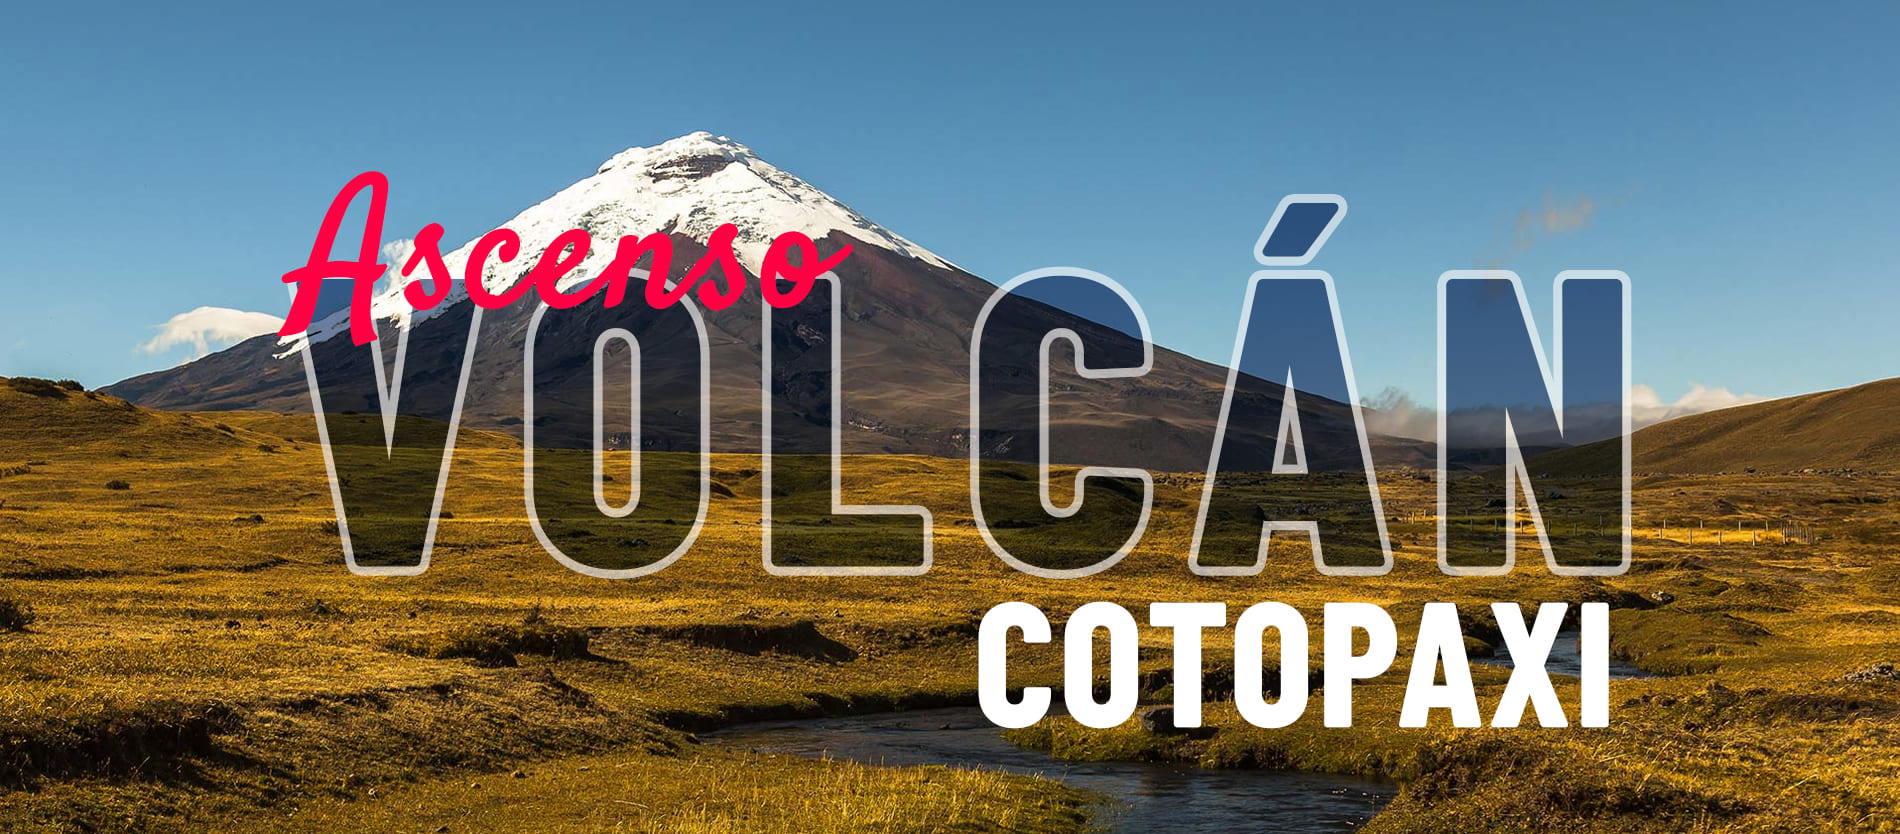 ascenso-volcan-cotopaxi